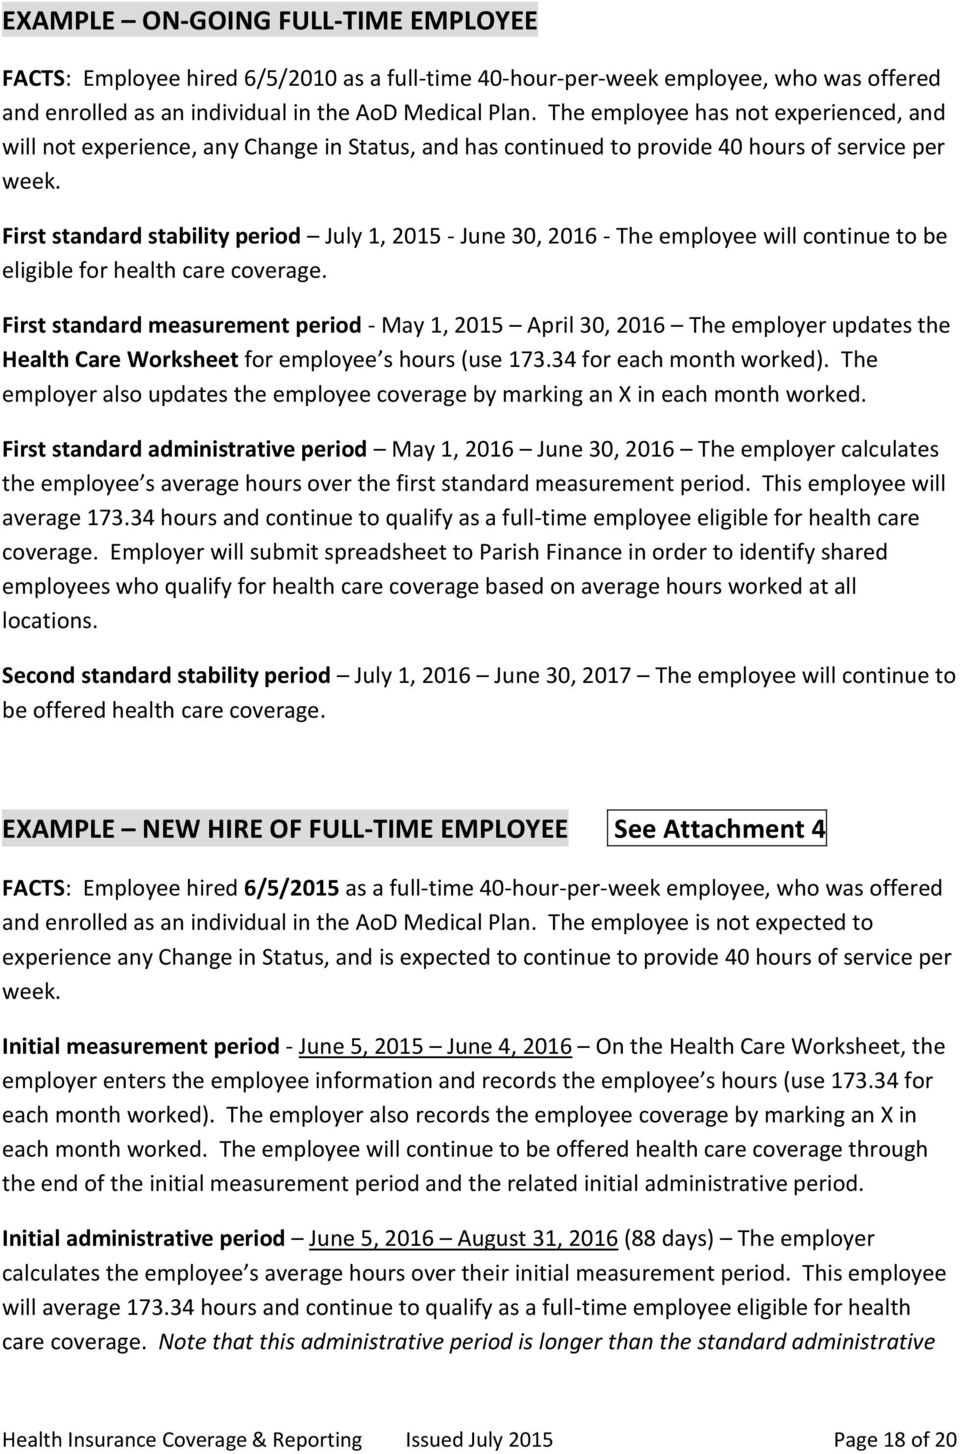 First standard stability period July 1, 2015 - June 30, 2016 - The employee will continue to be eligible for health care coverage.